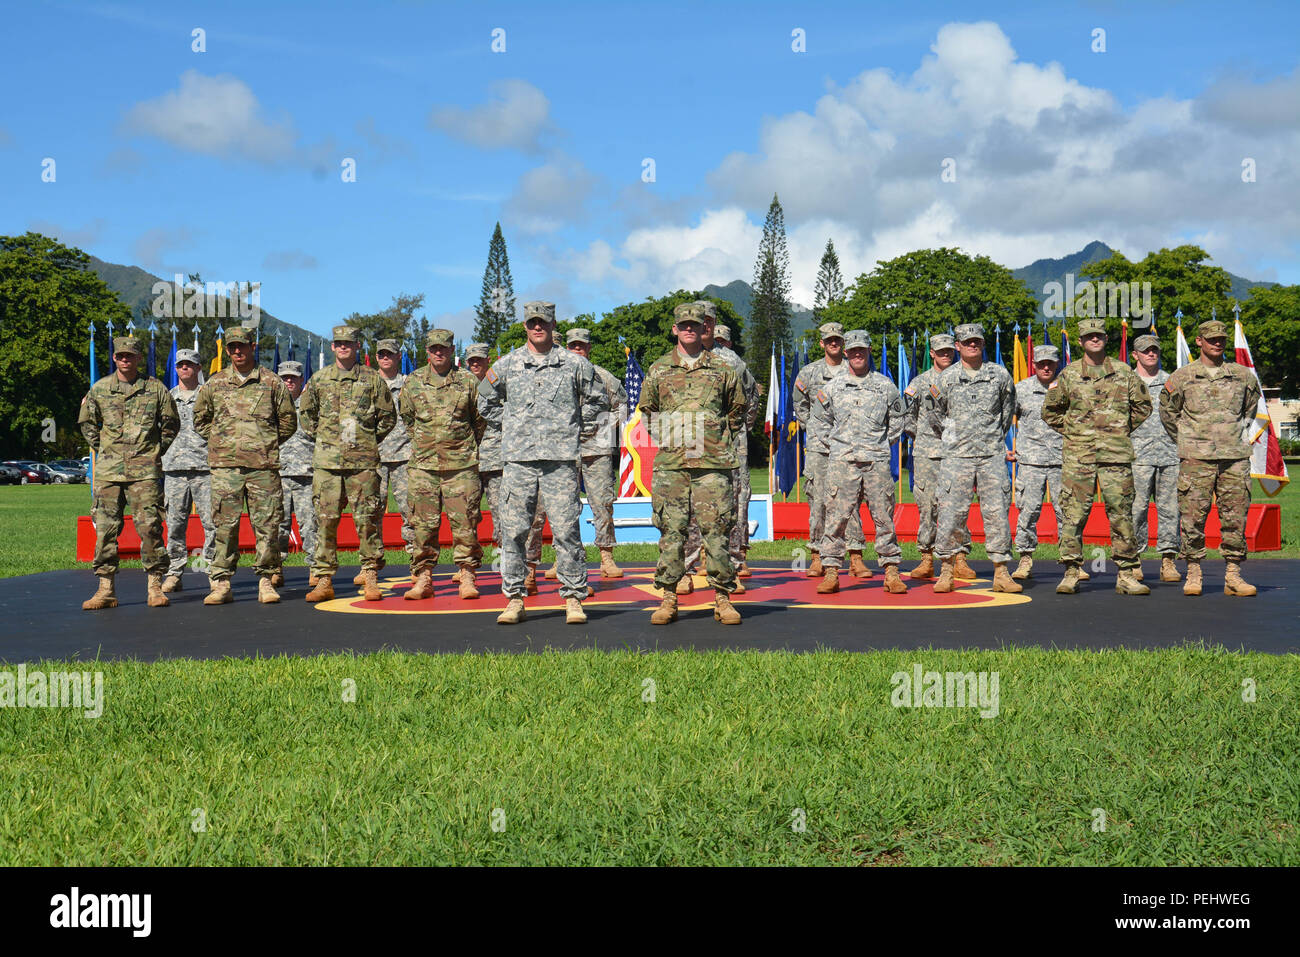 Twenty-two Expert Infantryman Badge (EIB) candidates were the first to test and receive EIBs in the Army under the new EIB standards Aug. 28 on Schofield Barracks. The awardees who exceeded course standards by receiving first time go on all events were: 1st Lt. Robert Doyle (front left), an infantry officer assigned to 1st Battalion, 21st Infantry Regiment, 2nd Stryker Brigade Combat Team, 25th Infantry Division, 1st Lt. Jonathan Kaicher (front right), an infantry officer assigned to 1st Battalion, 27th Infantry Regiment, 2SBCT. (U.S. Army photo by Staff Sgt. Carlos Davis, 2nd Stryker Brigade  Stock Photo